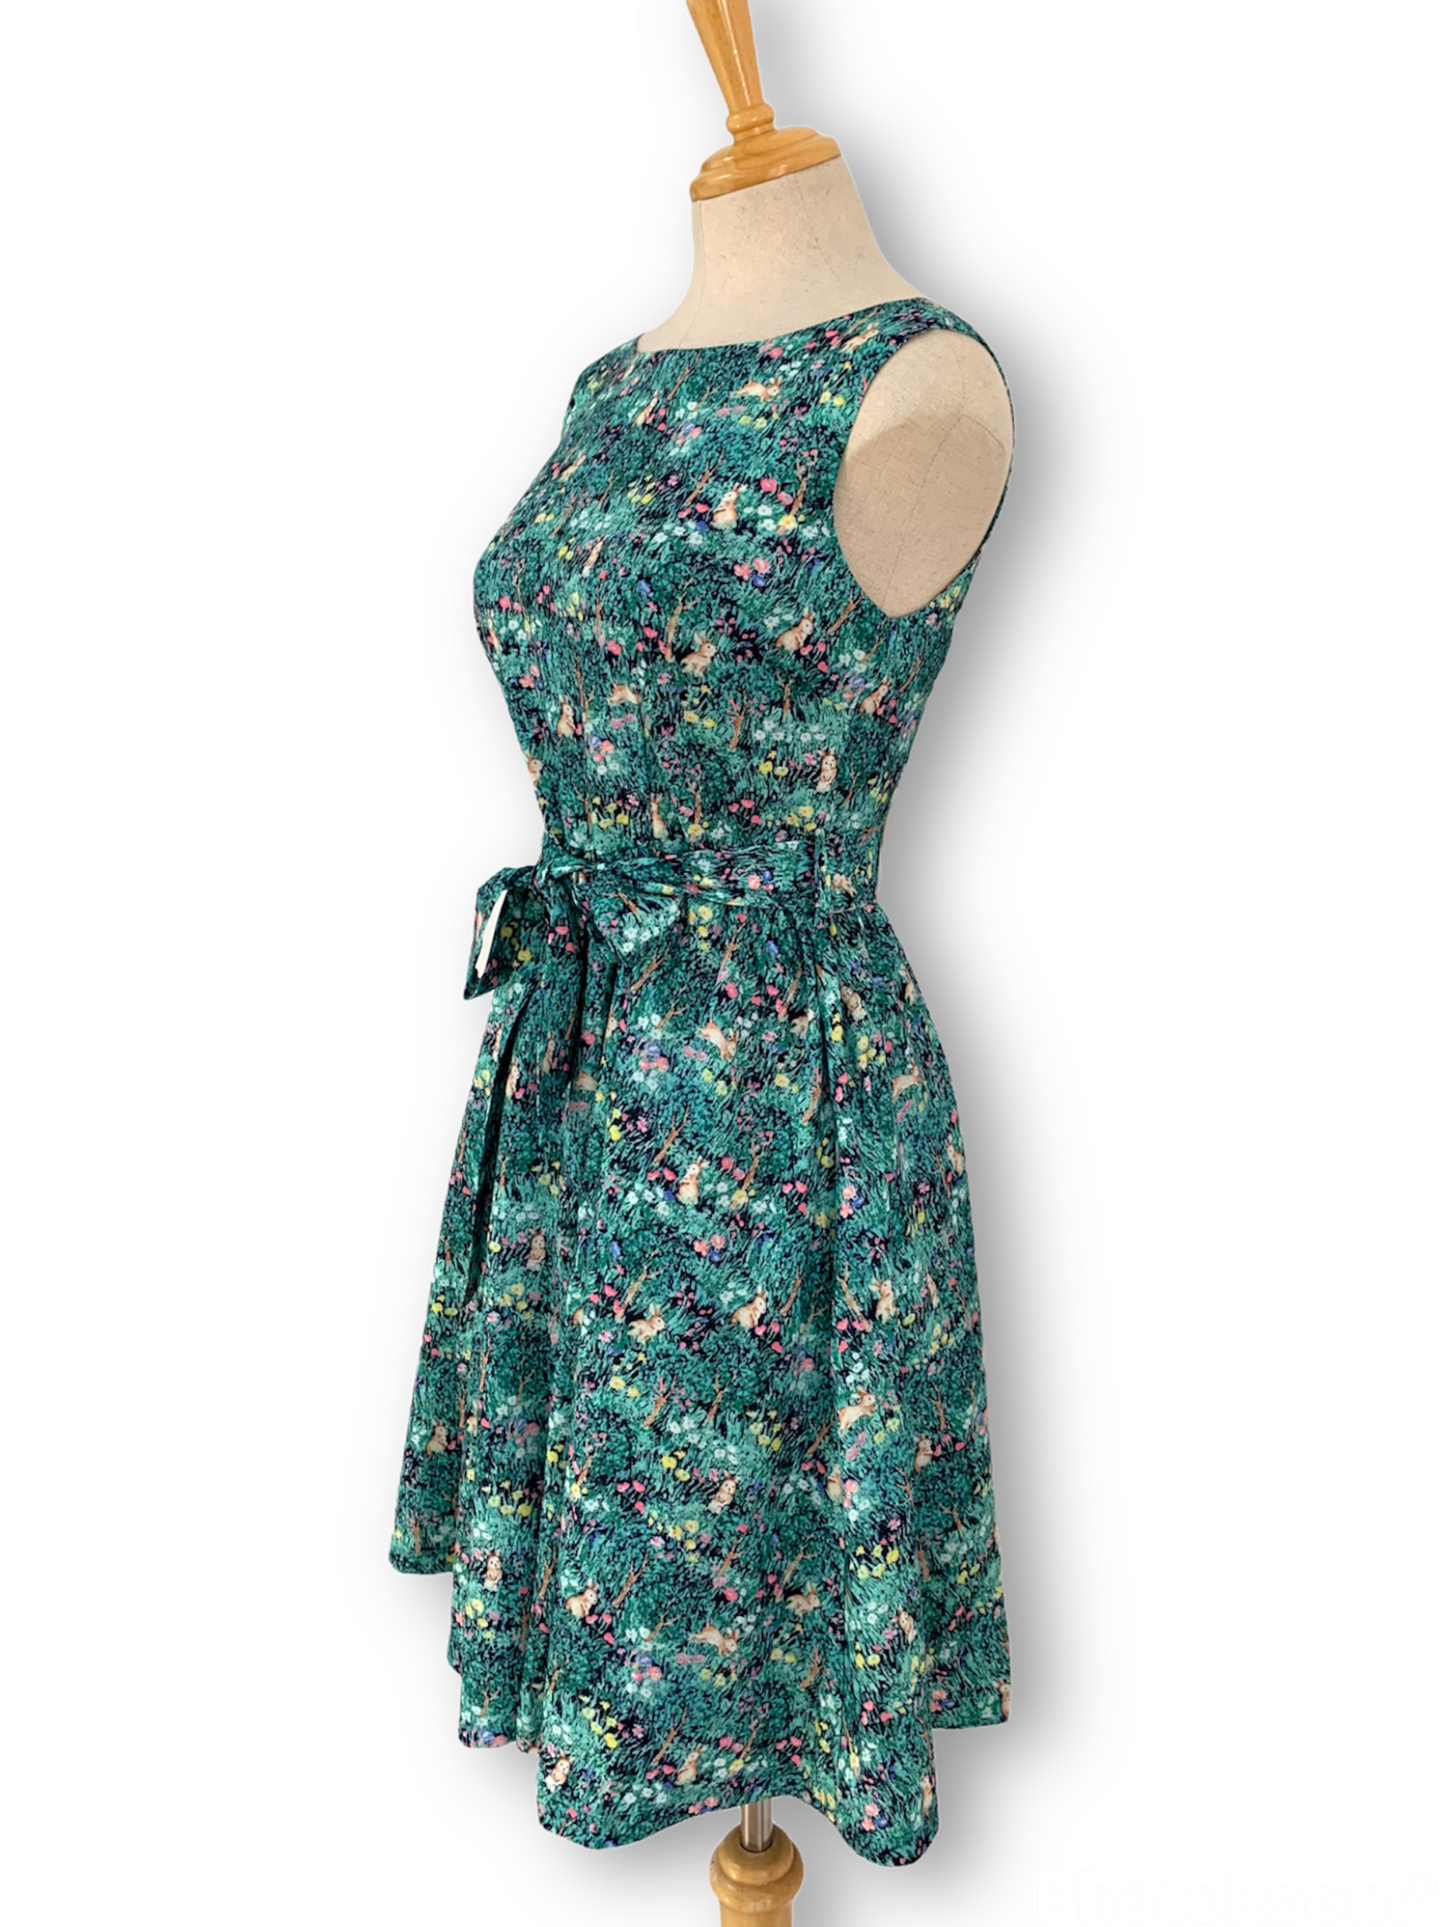 Spring Blooming Dress - Bunny Meadows